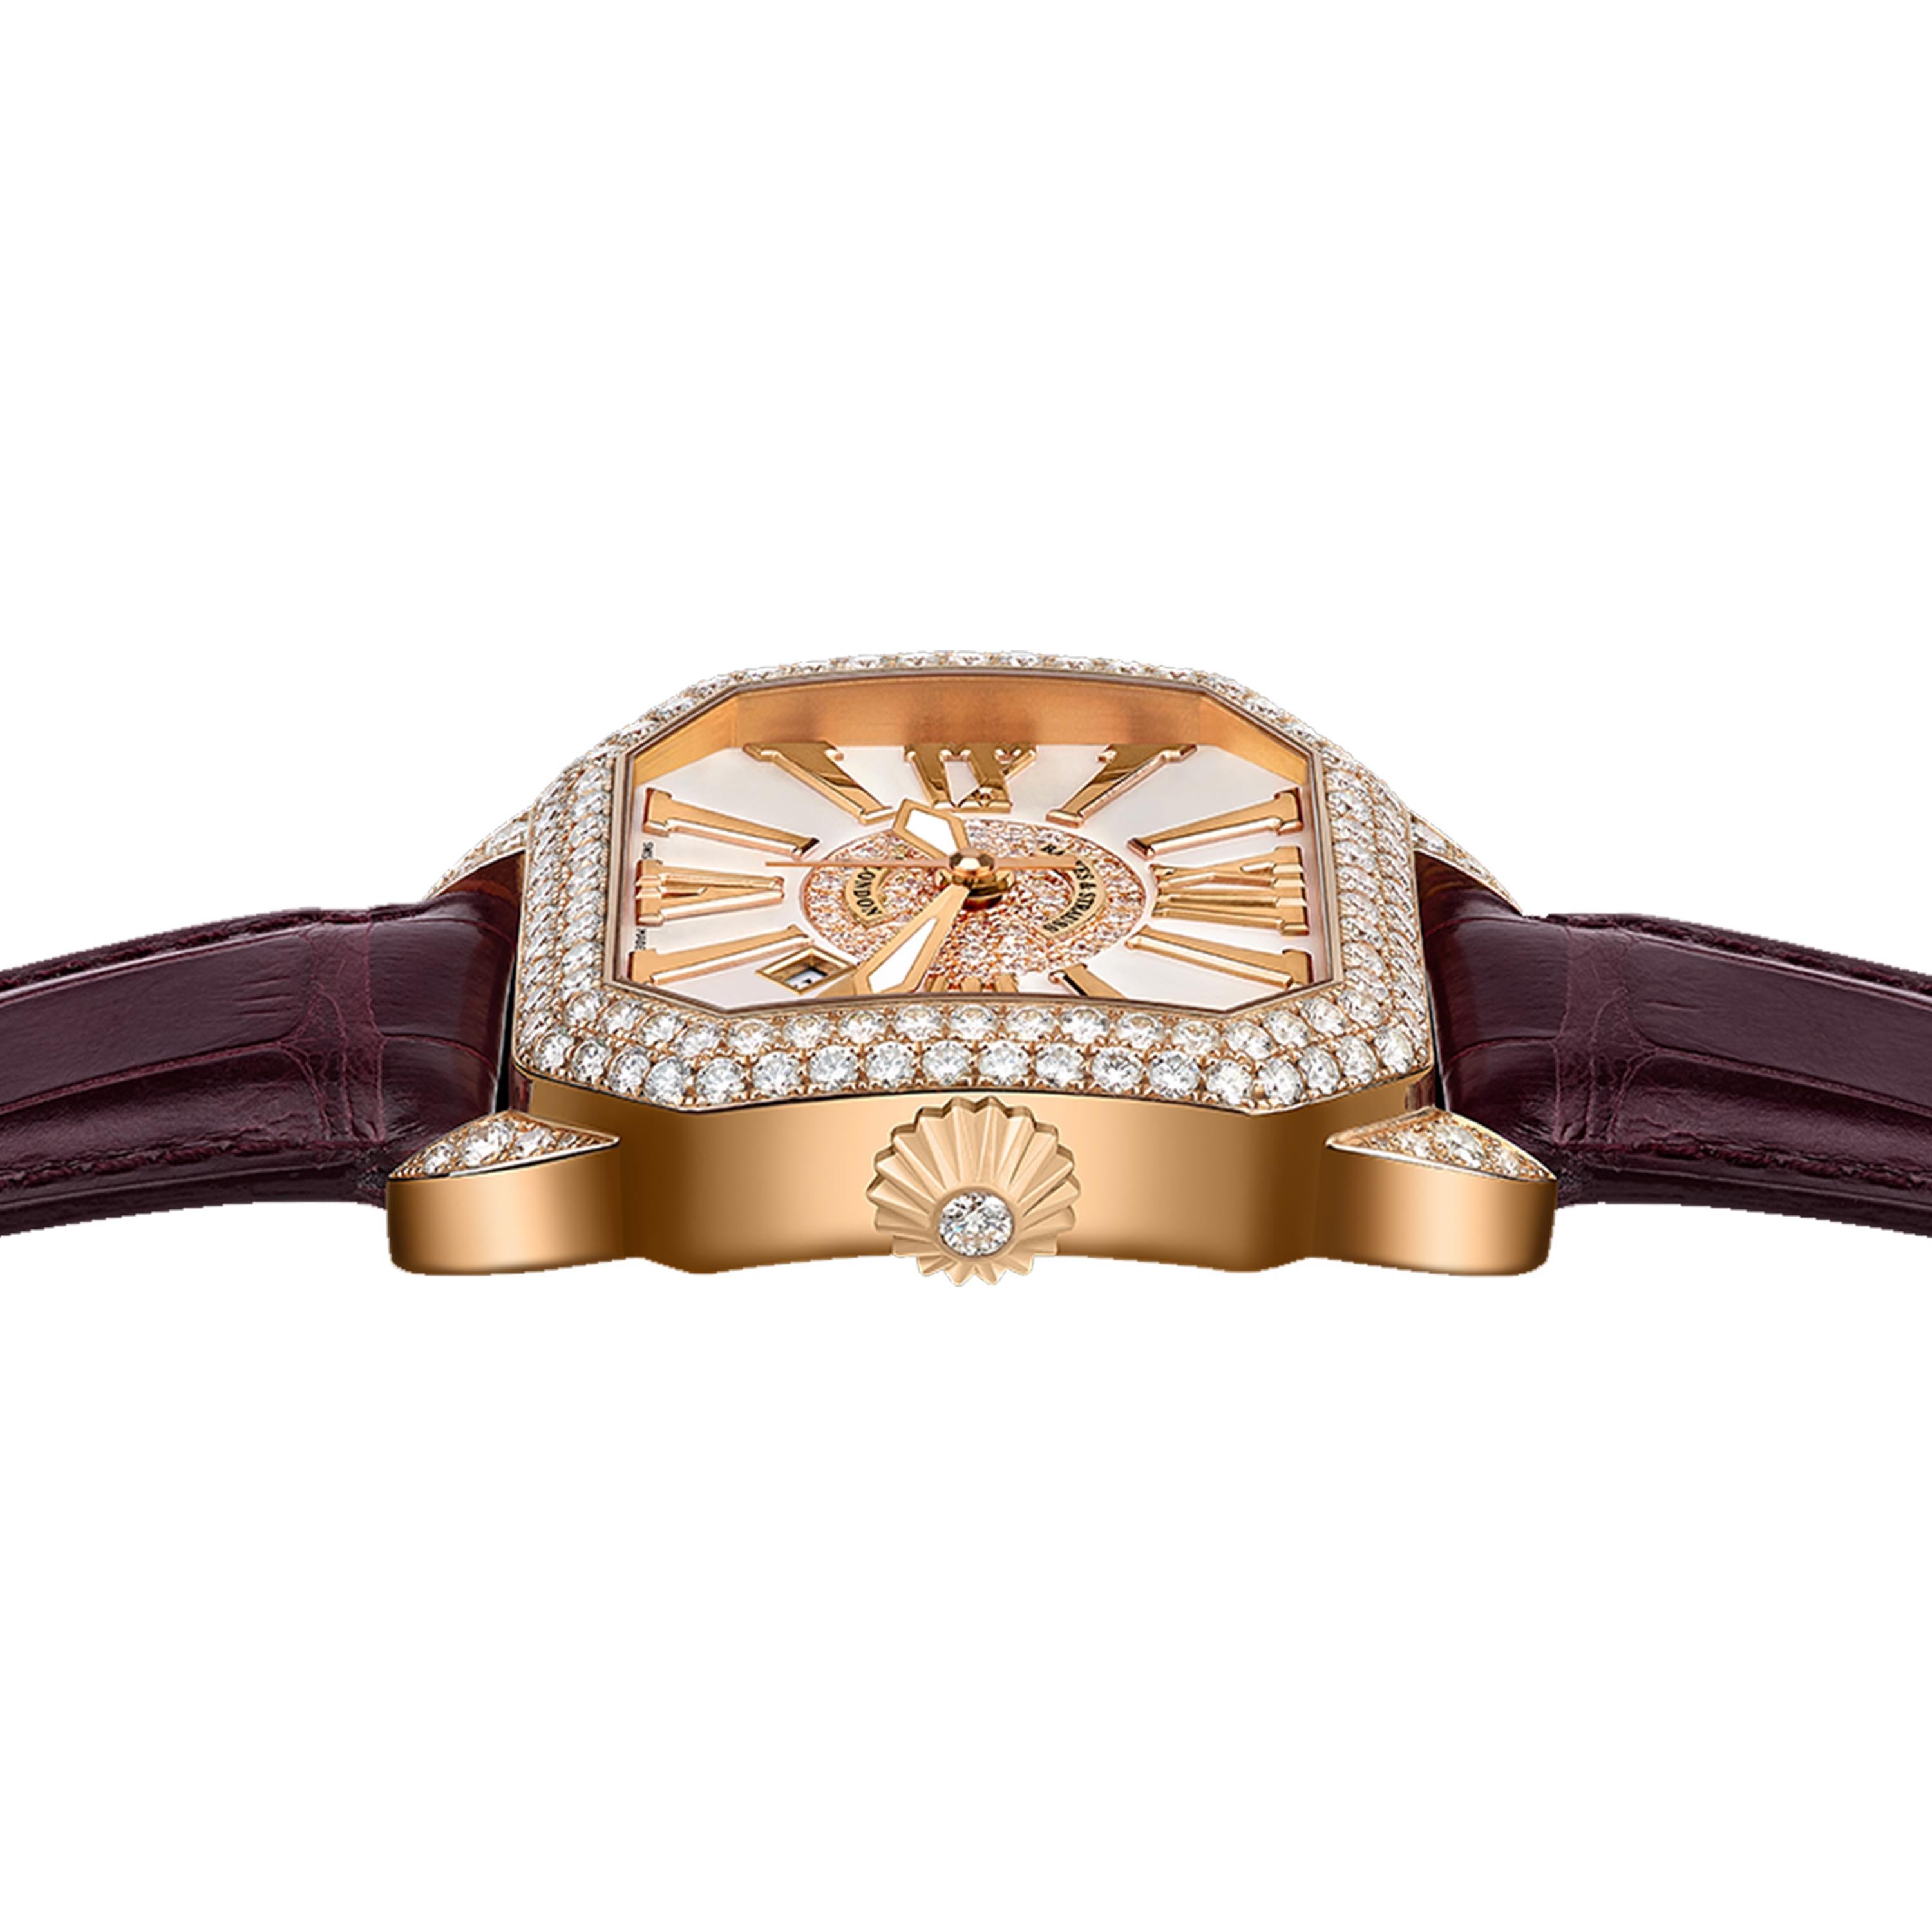 Berkeley 40 is a luxury diamond watch for men and women crafted in 18kt rose gold, featuring the mother-of-pearl dial with rose gold Roman numerals, automatic movement. The case, dial, buckle and crown are set with white Ideal Cut diamonds. It is a